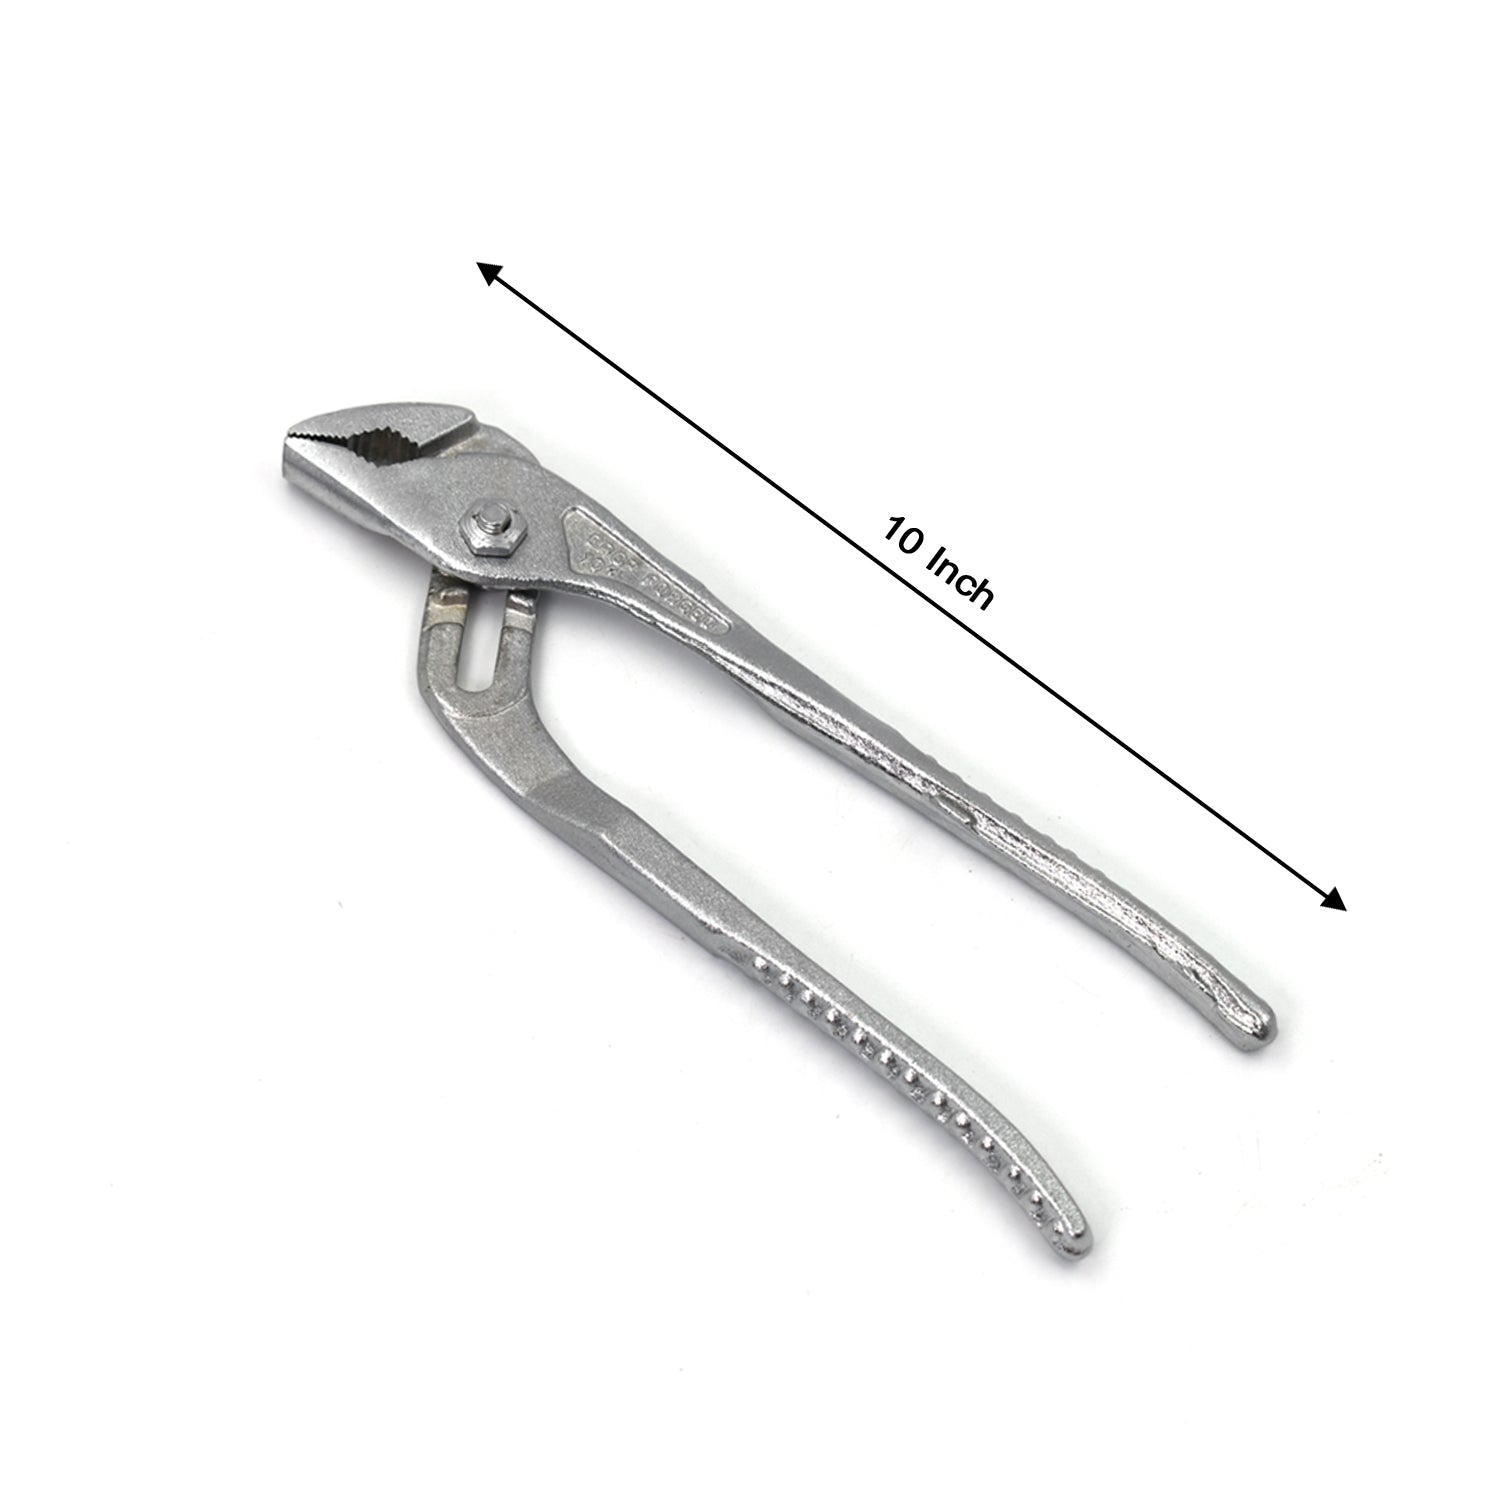 9026 Hand Tool - Water Pump Adjustable Plier Wrench Slip Joint Type, Chrome Plated 